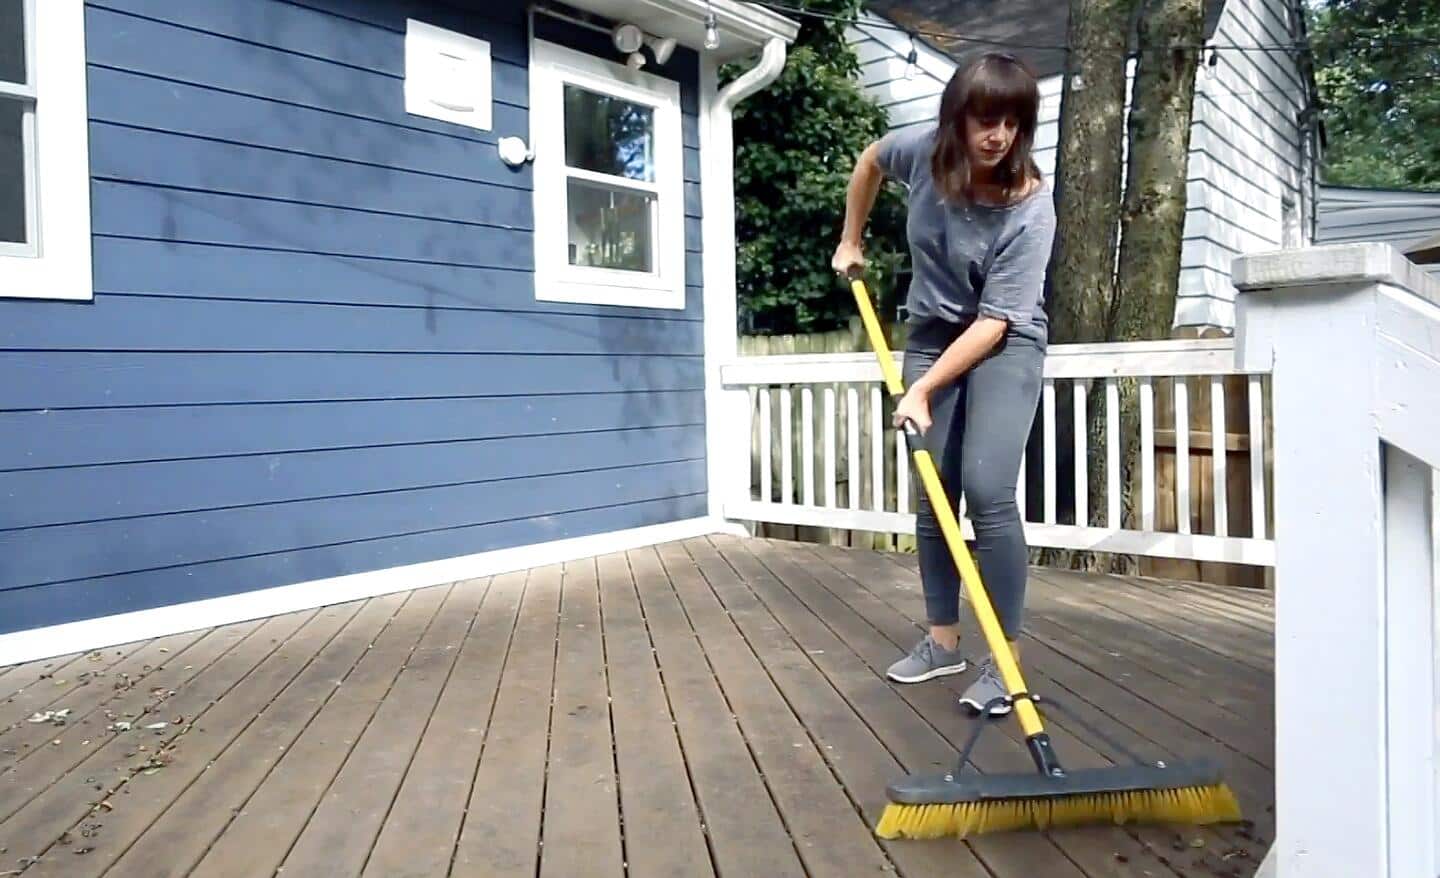 A woman uses a push broom to sweep leaves and other debris from a wooden deck that is to be refinished.